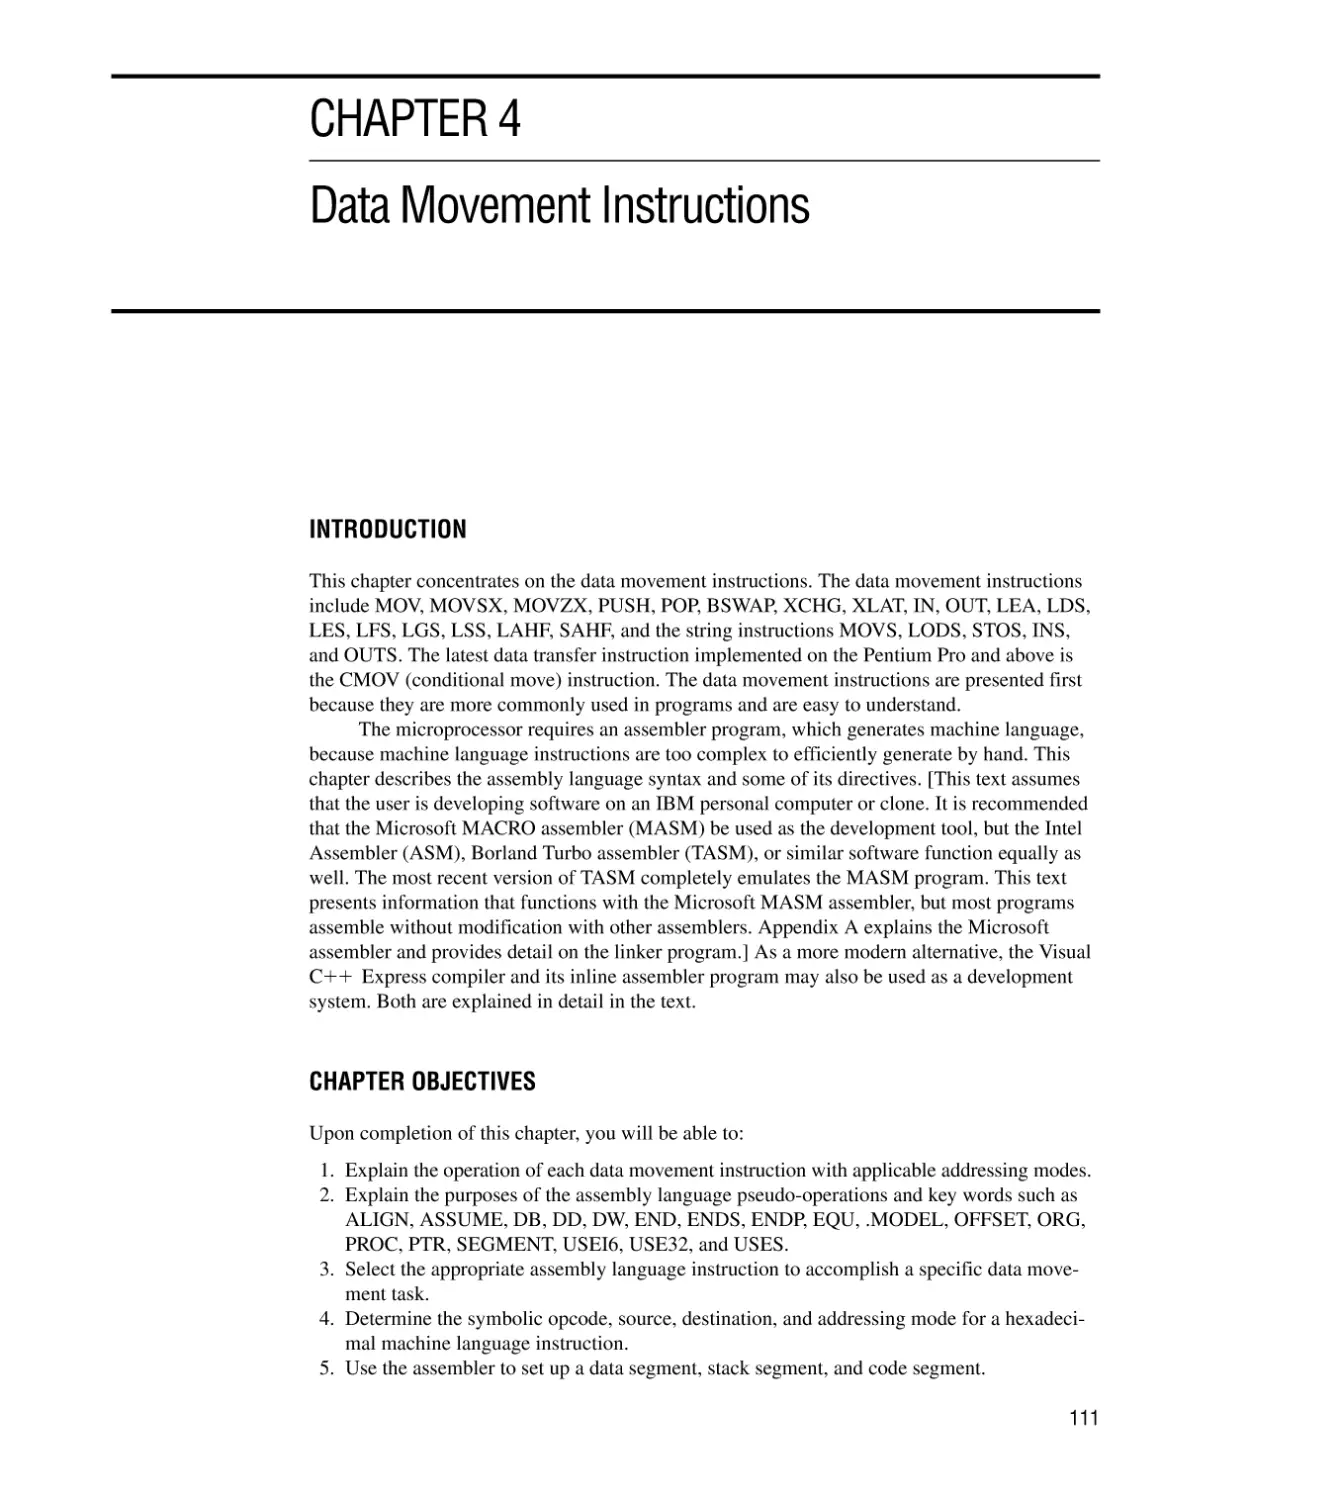 CHAPTER 4 DATA MOVEMENT INSTRUCTIONS
Introduction/Chapter Objectives